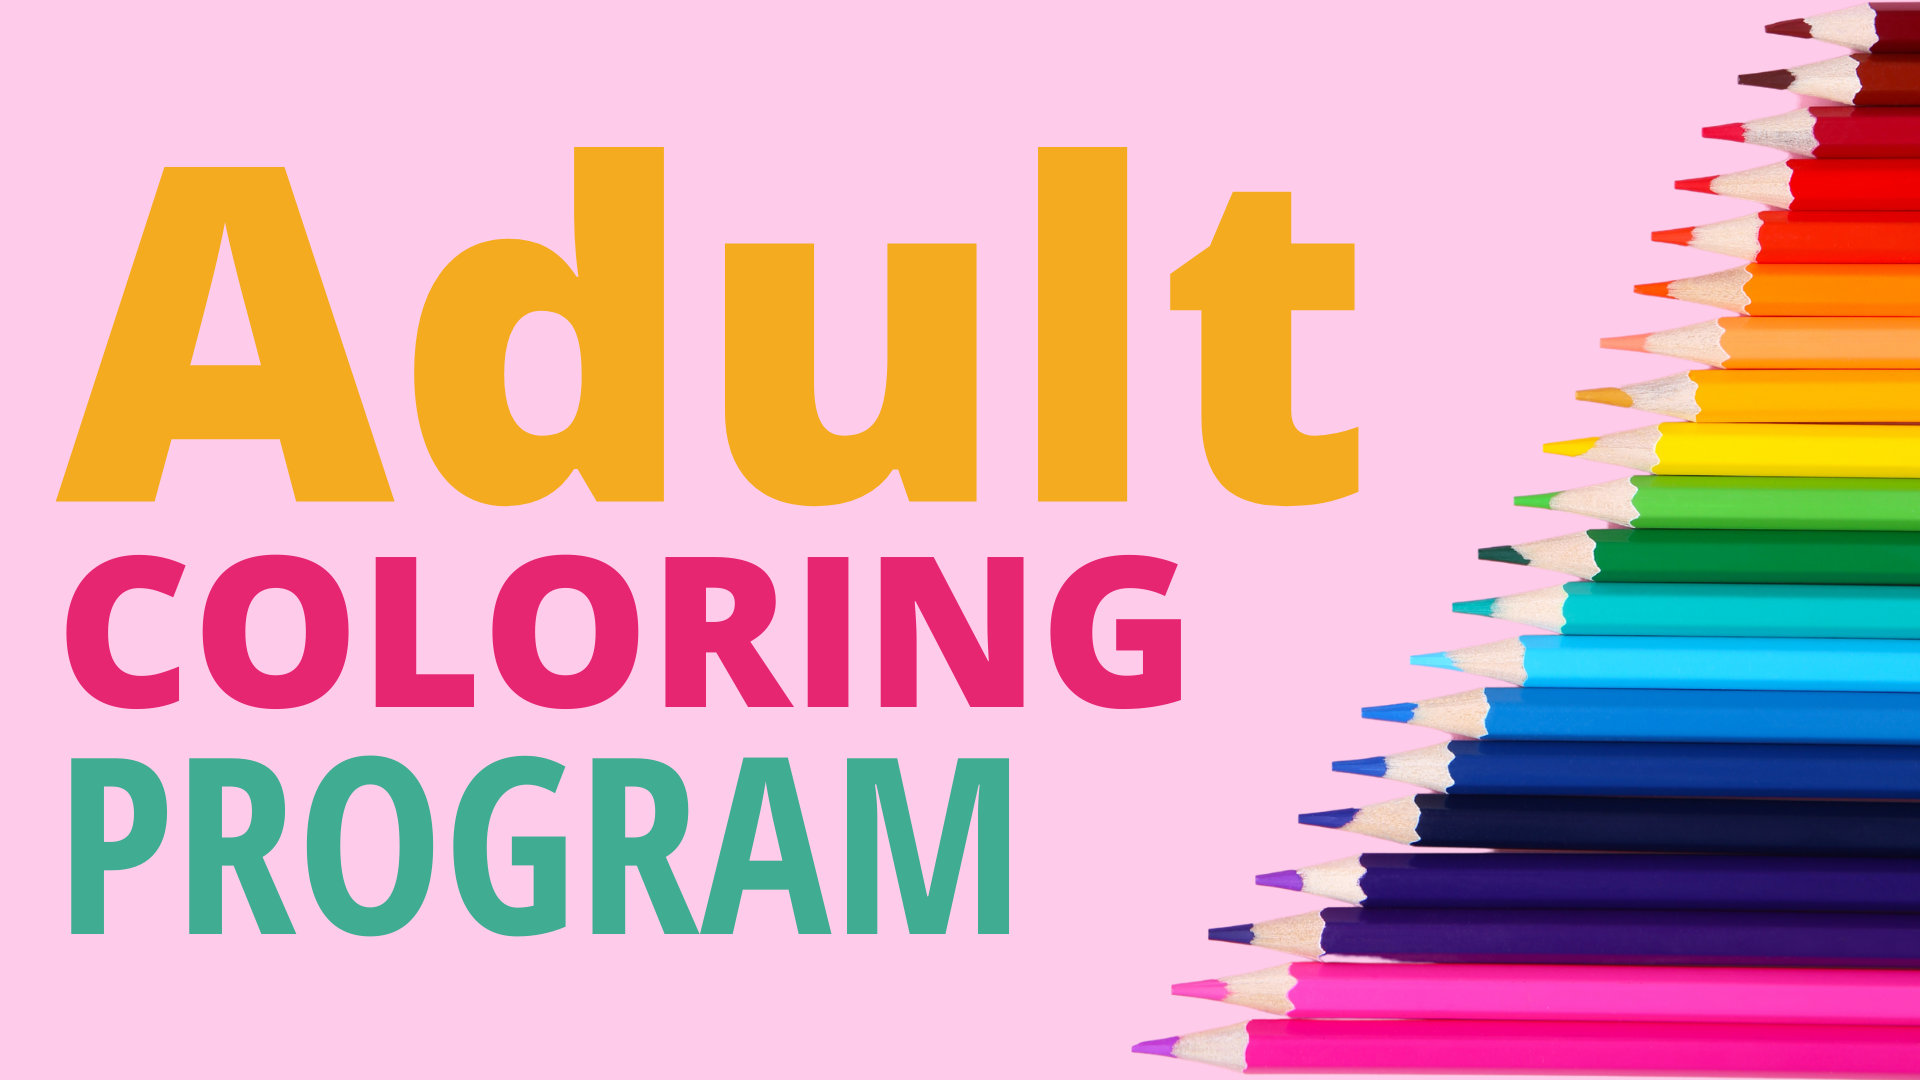 Pink background with multiple colored pencils pointing left toward words: Adult Coloring Program